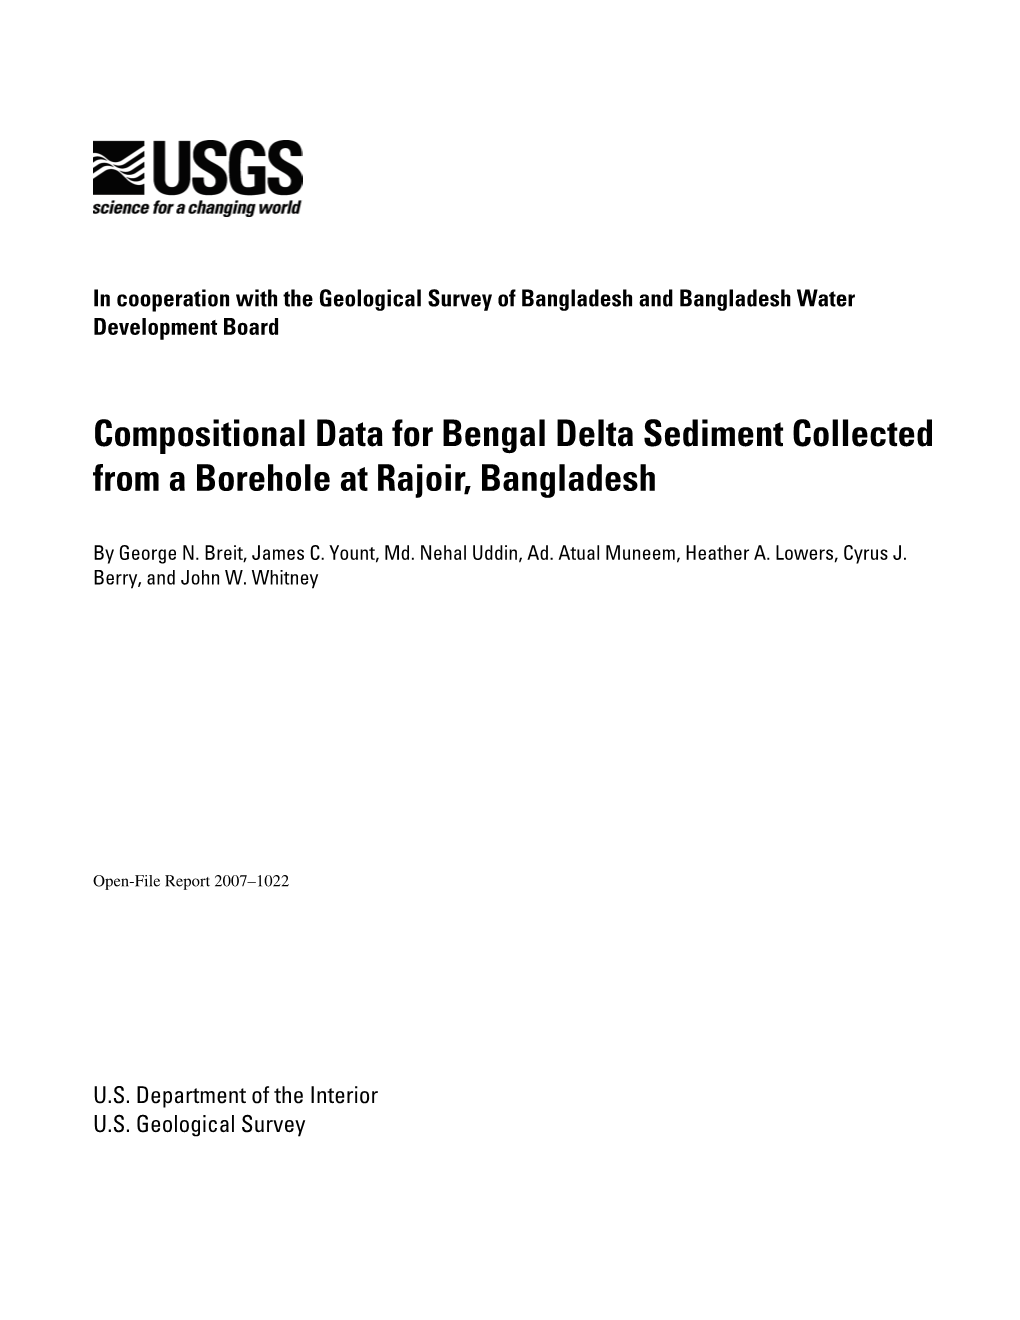 Compositional Data for Bengal Delta Sediment Collected from a Borehole at Rajoir, Bangladesh